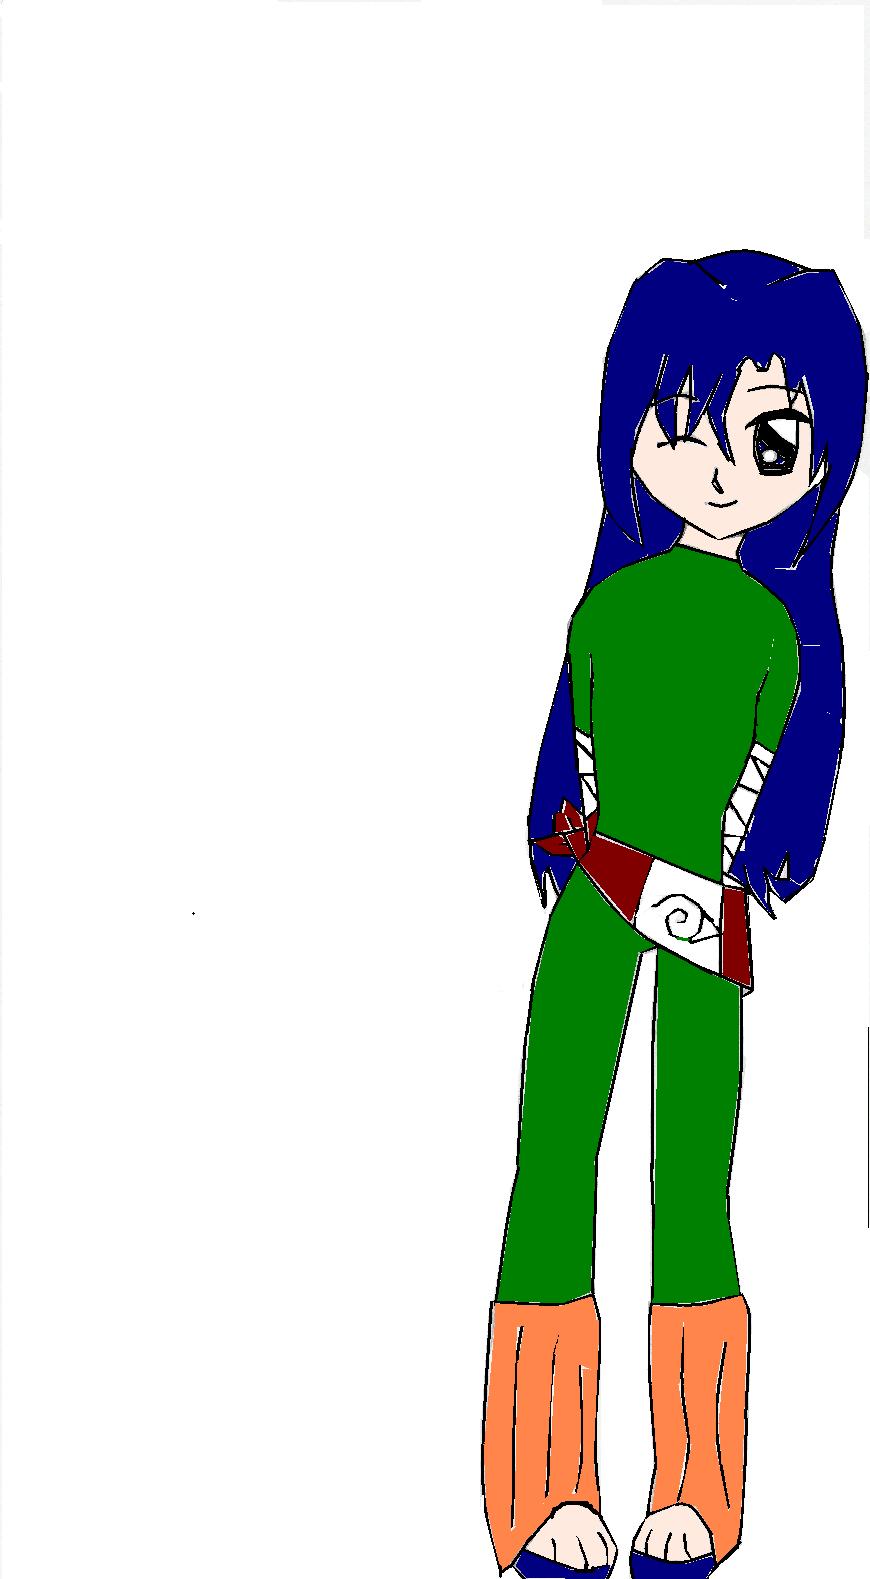 my original character in rock lee clothing by FUZZY_EYEBROWS_LUVER